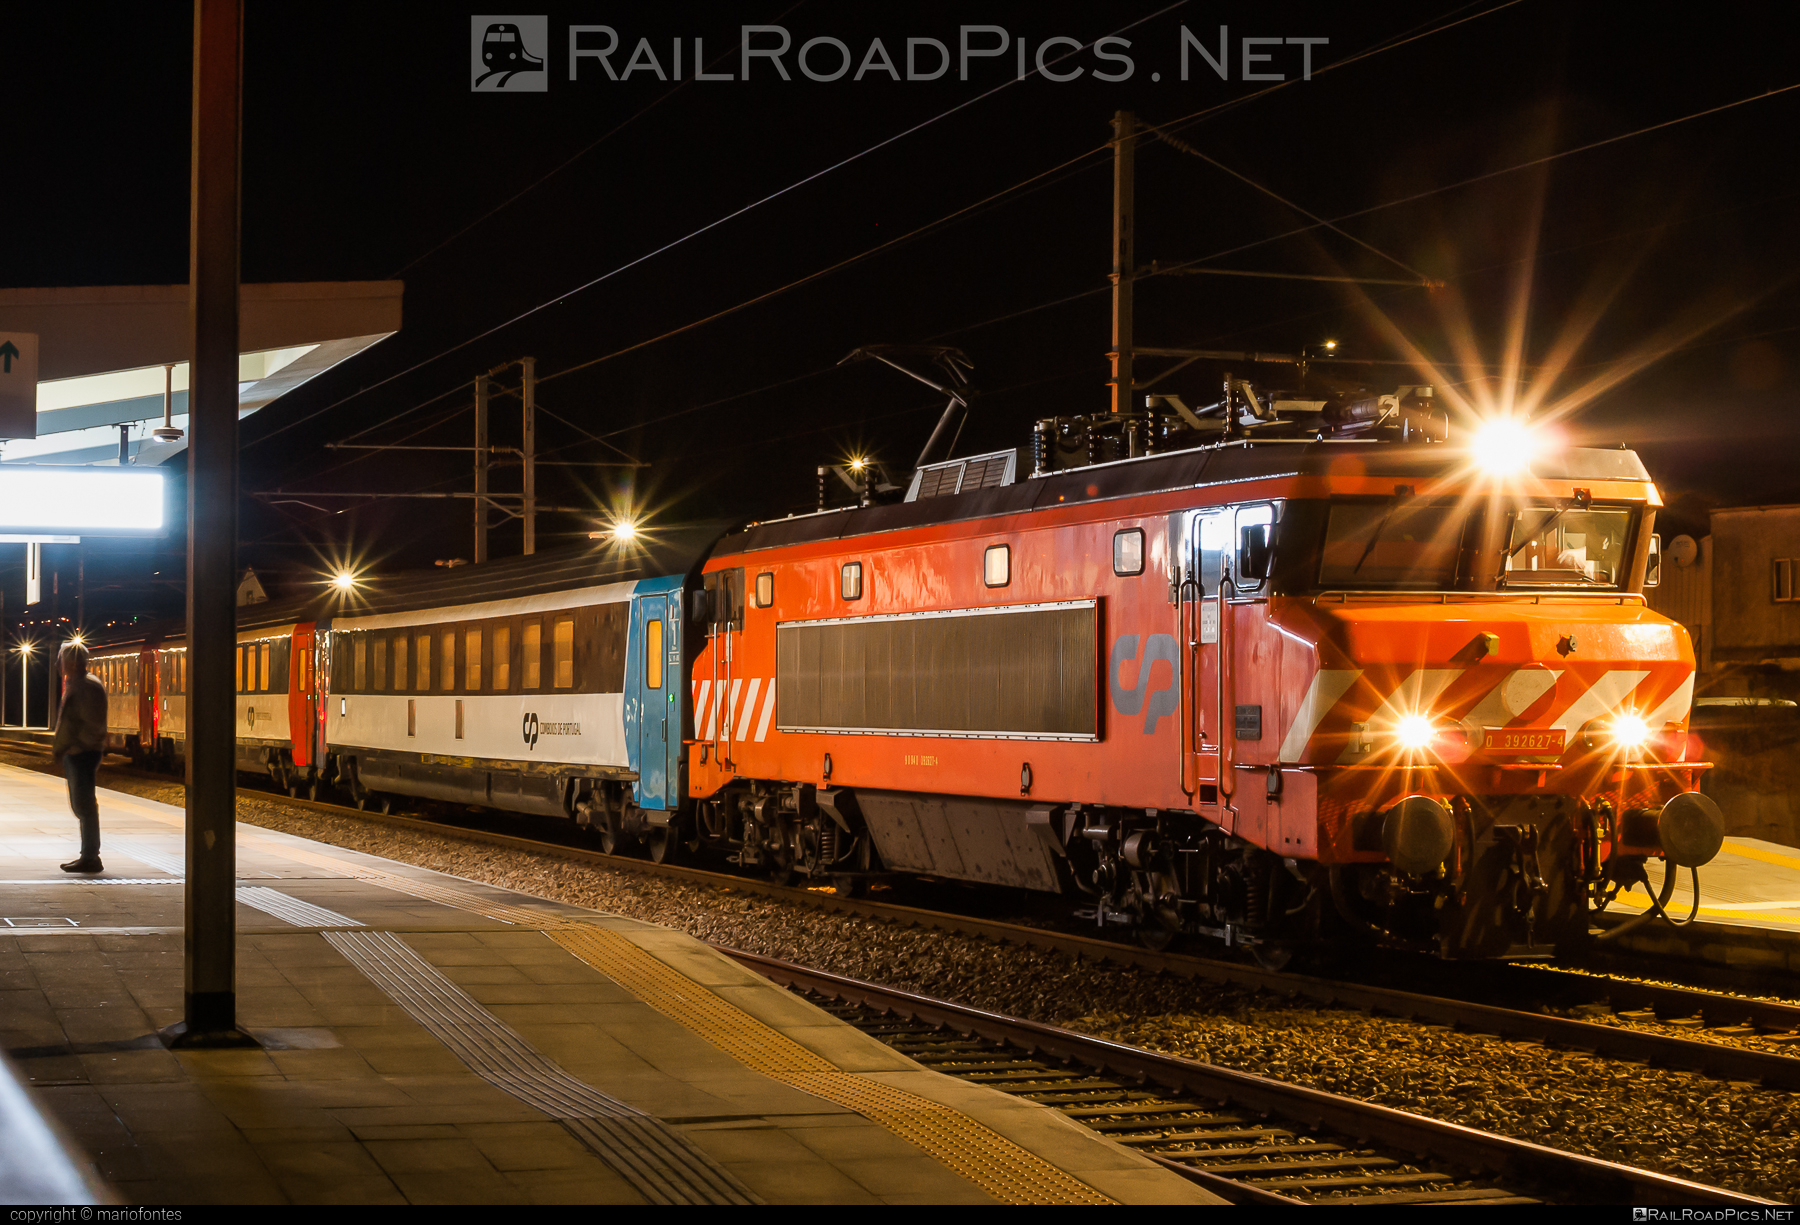 CP Class 2620 - 2627 operated by CP - Comboios de Portugal, E.P.E. #comboiosDePortugal #comboiosDePortugalEPE #cpClass2620 #nezCassee #sncfBB15000